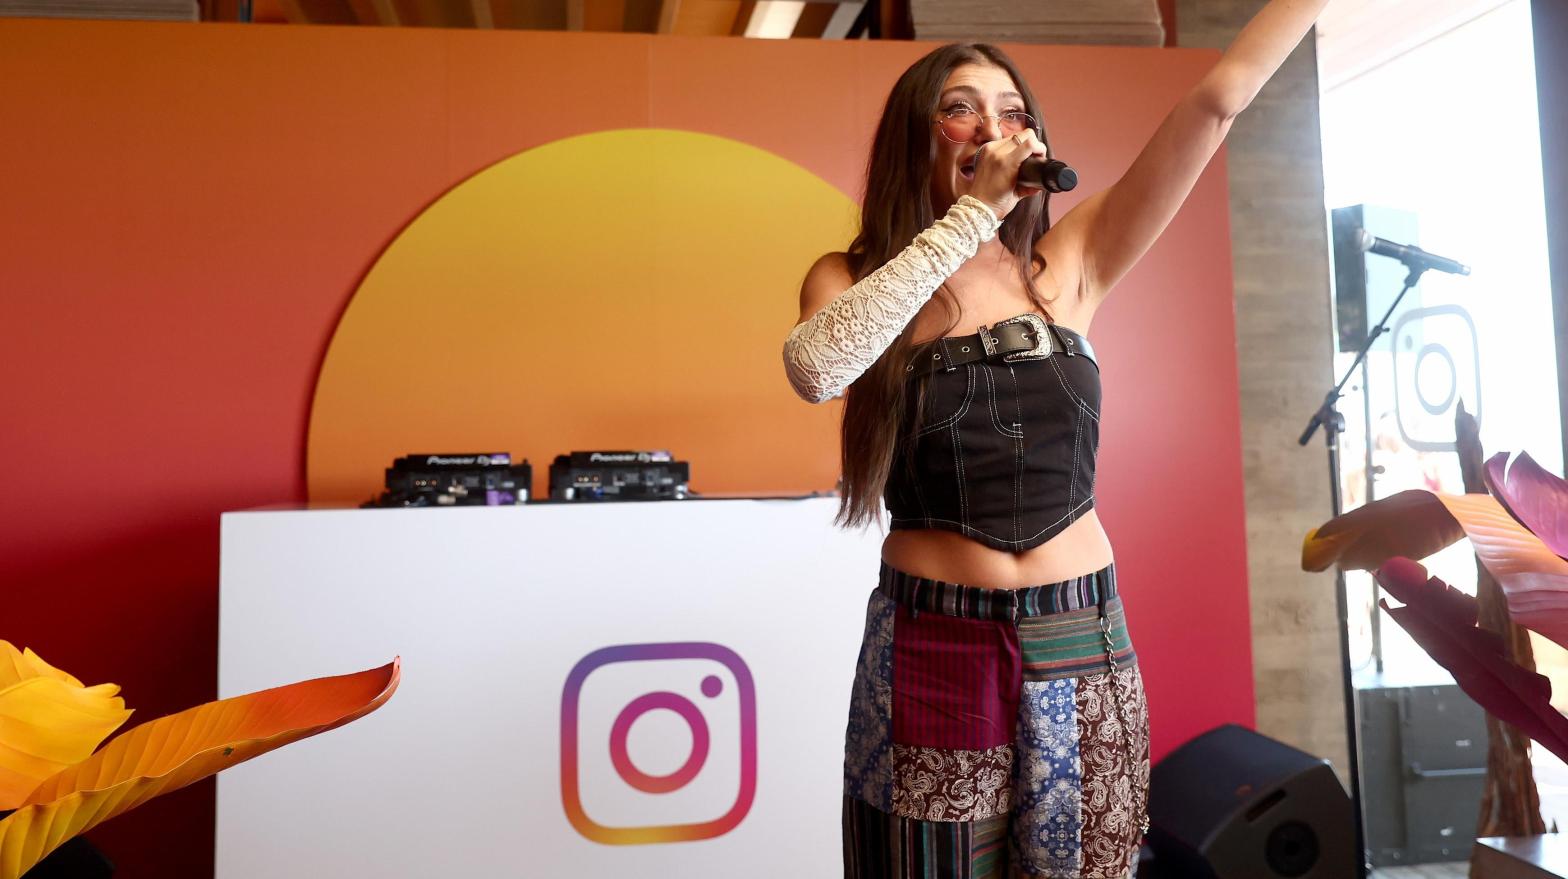 Instagram content creators have reportedly received thousands of dollars at times for racking up millions of views on short-form Reels videos. (Photo: Emma McIntyre, Getty Images)